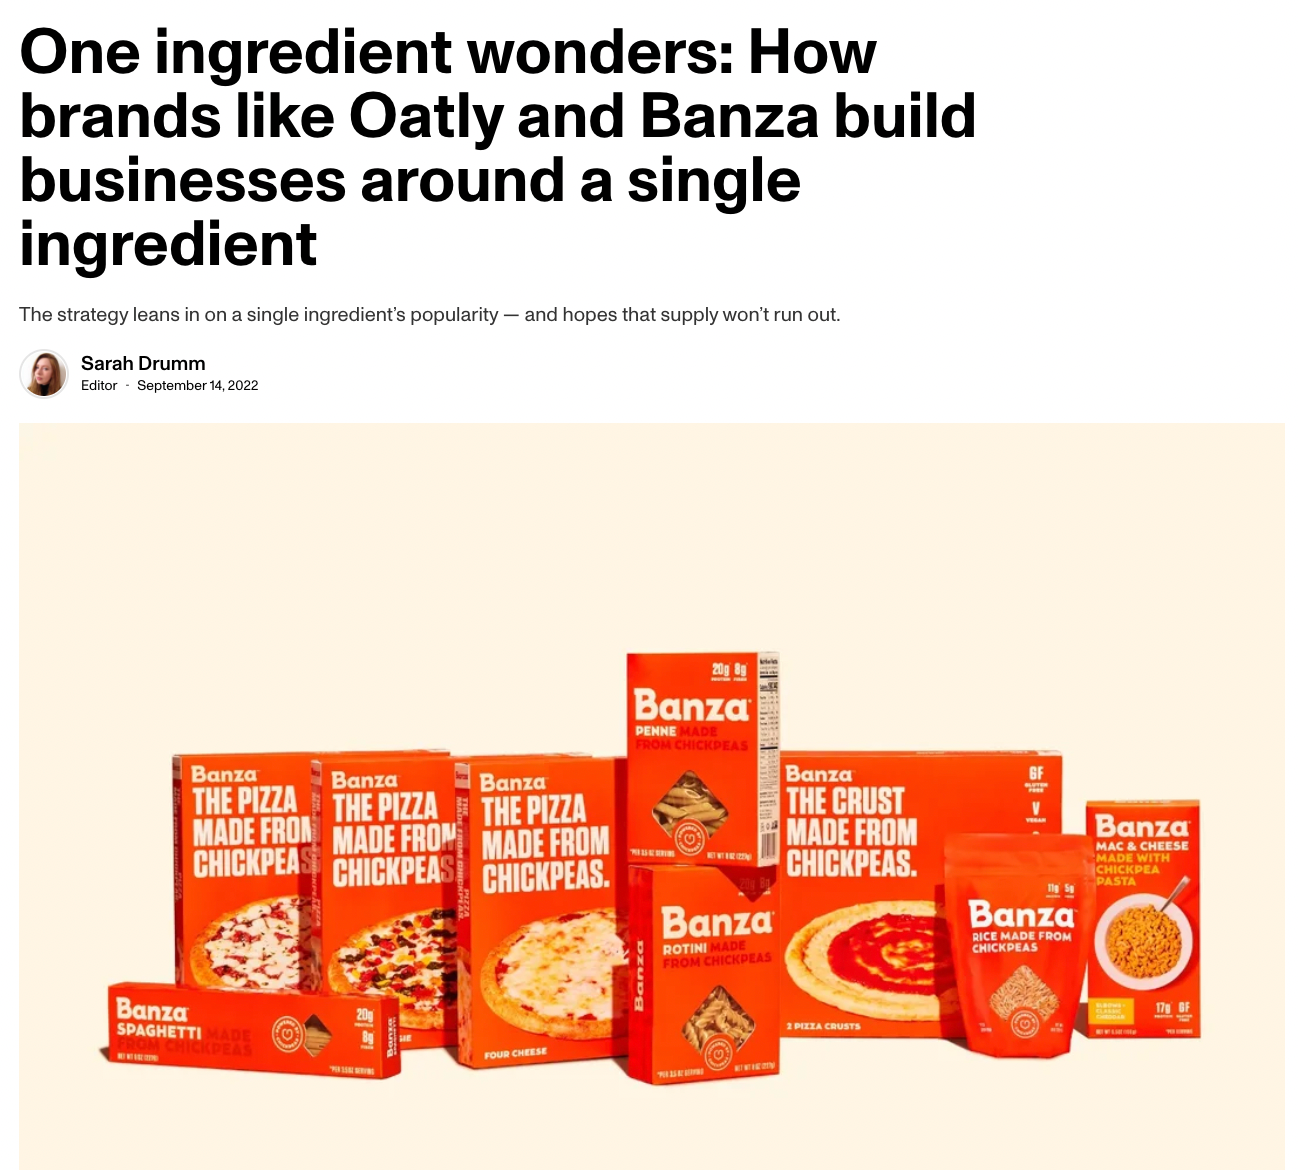 One ingredient wonders: How brands like Oatly and Banza build businesses around a single ingredient